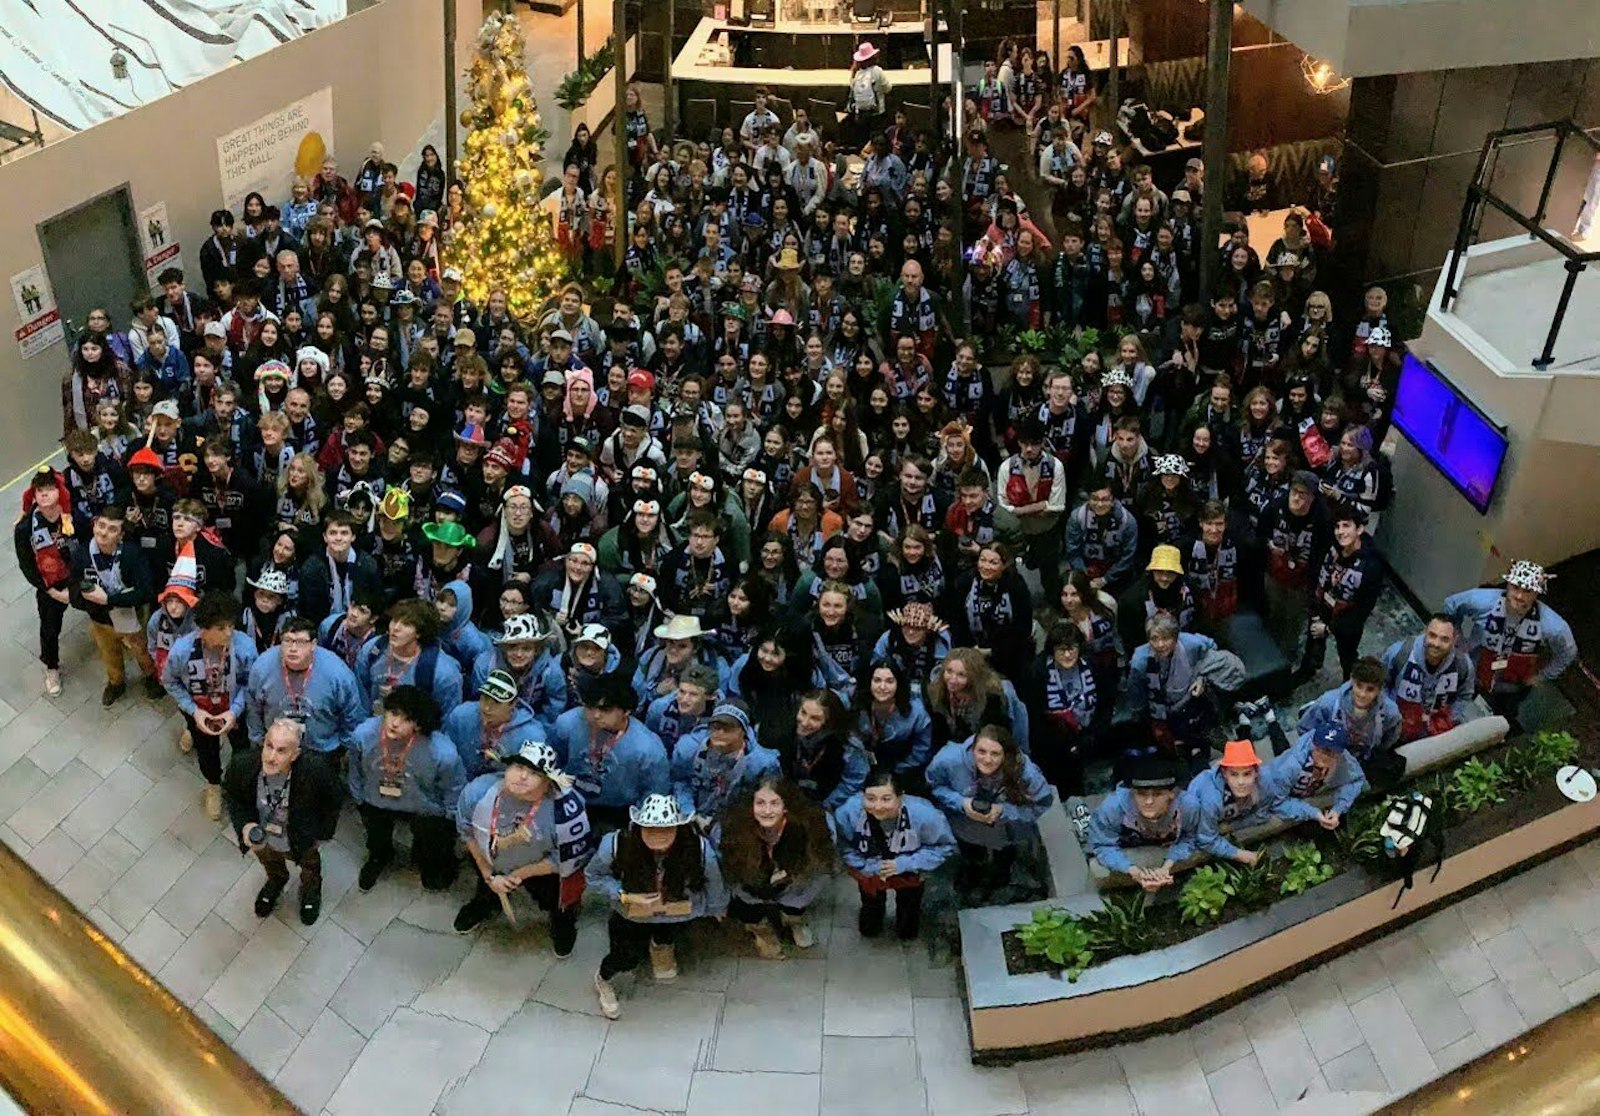 The Detroit delegation to the National Catholic Youth Conference in Indianapolis poses for a group photo. The Archdiocese of Detroit sent six buses of young people and chaperones to the conference, which was attended by more than 12,000 youths from all over the country. (Photo courtesy of Laura Piccone-Hanchon)